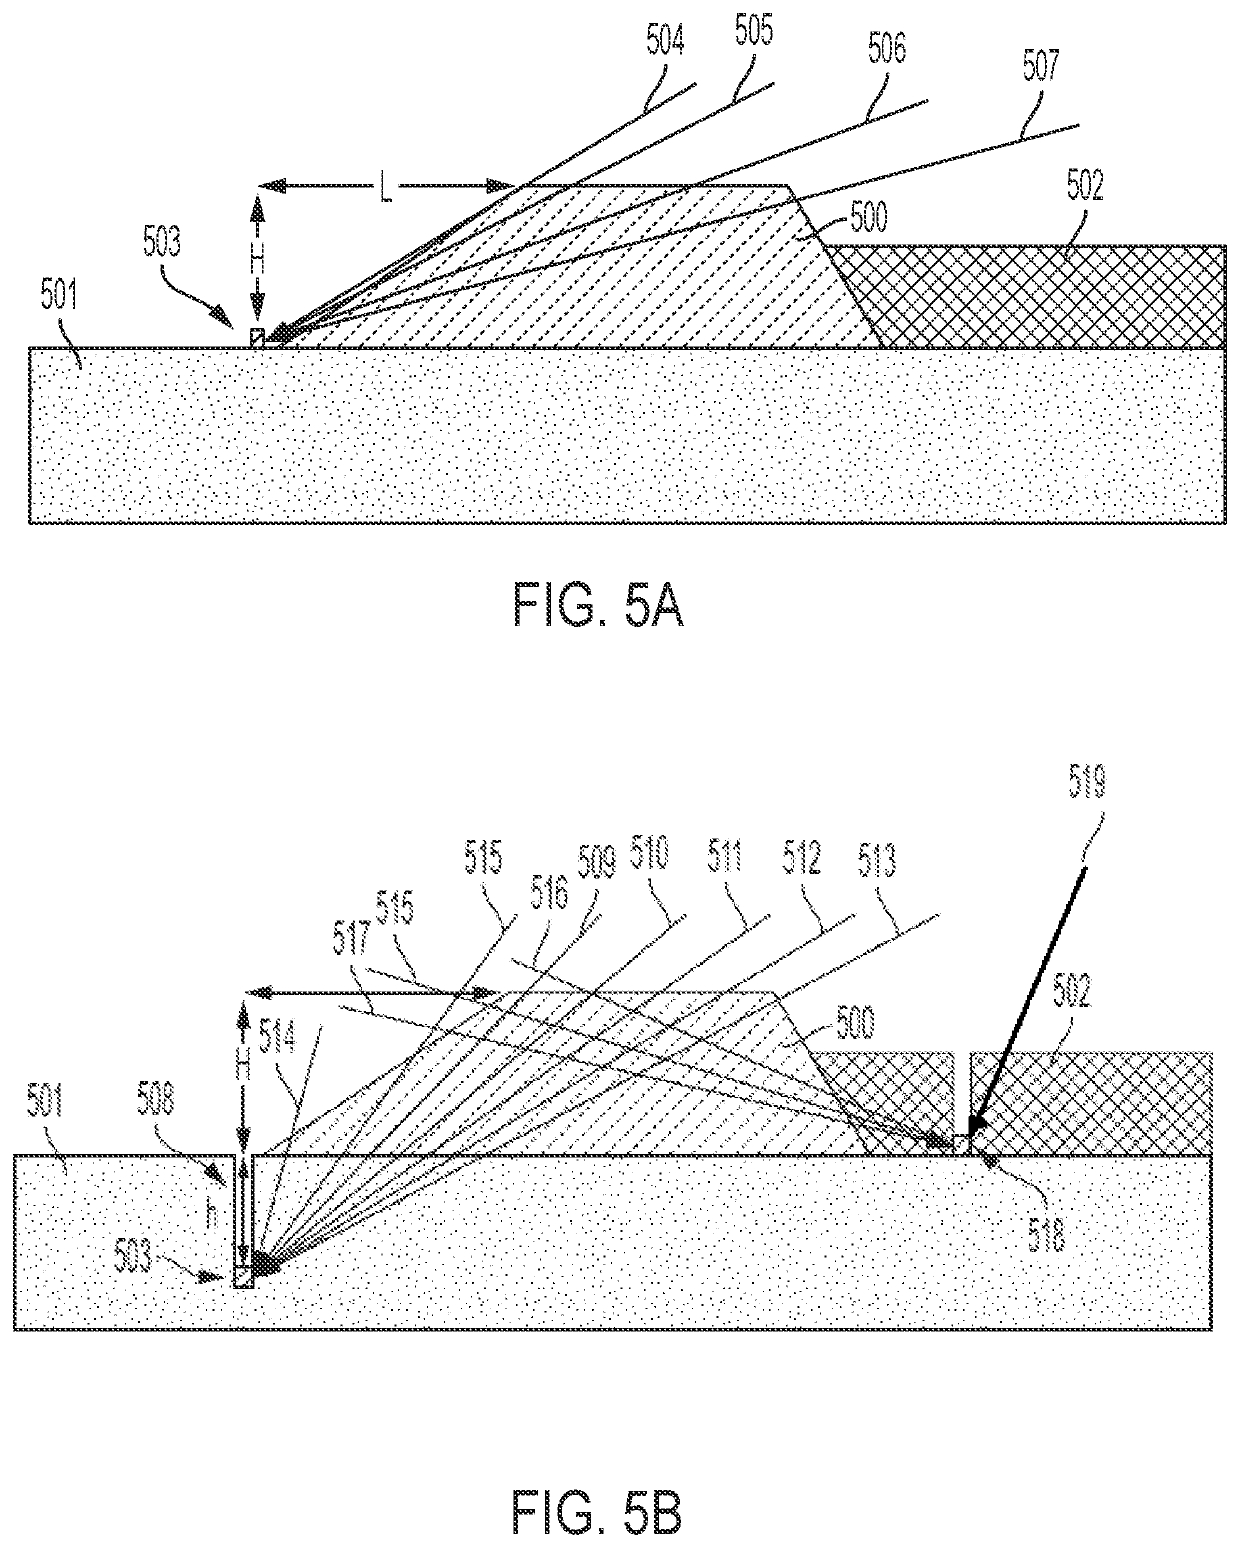 Systems and methods for monitoring slope stability